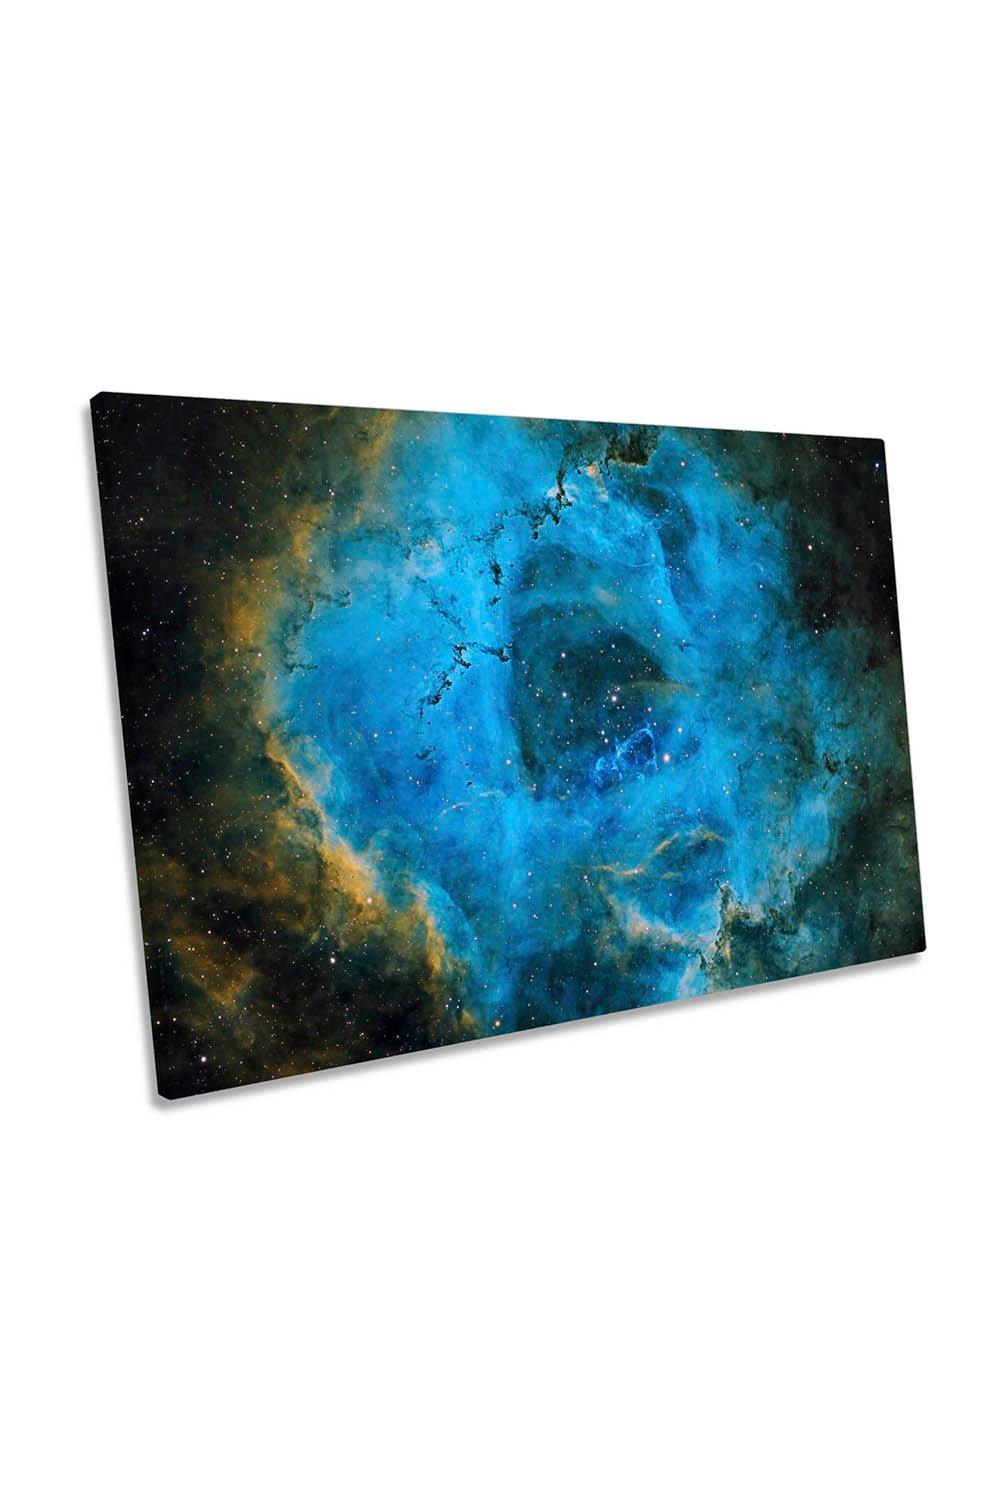 Rosette Outer Space Astronomy Blue Canvas Wall Art Picture Print